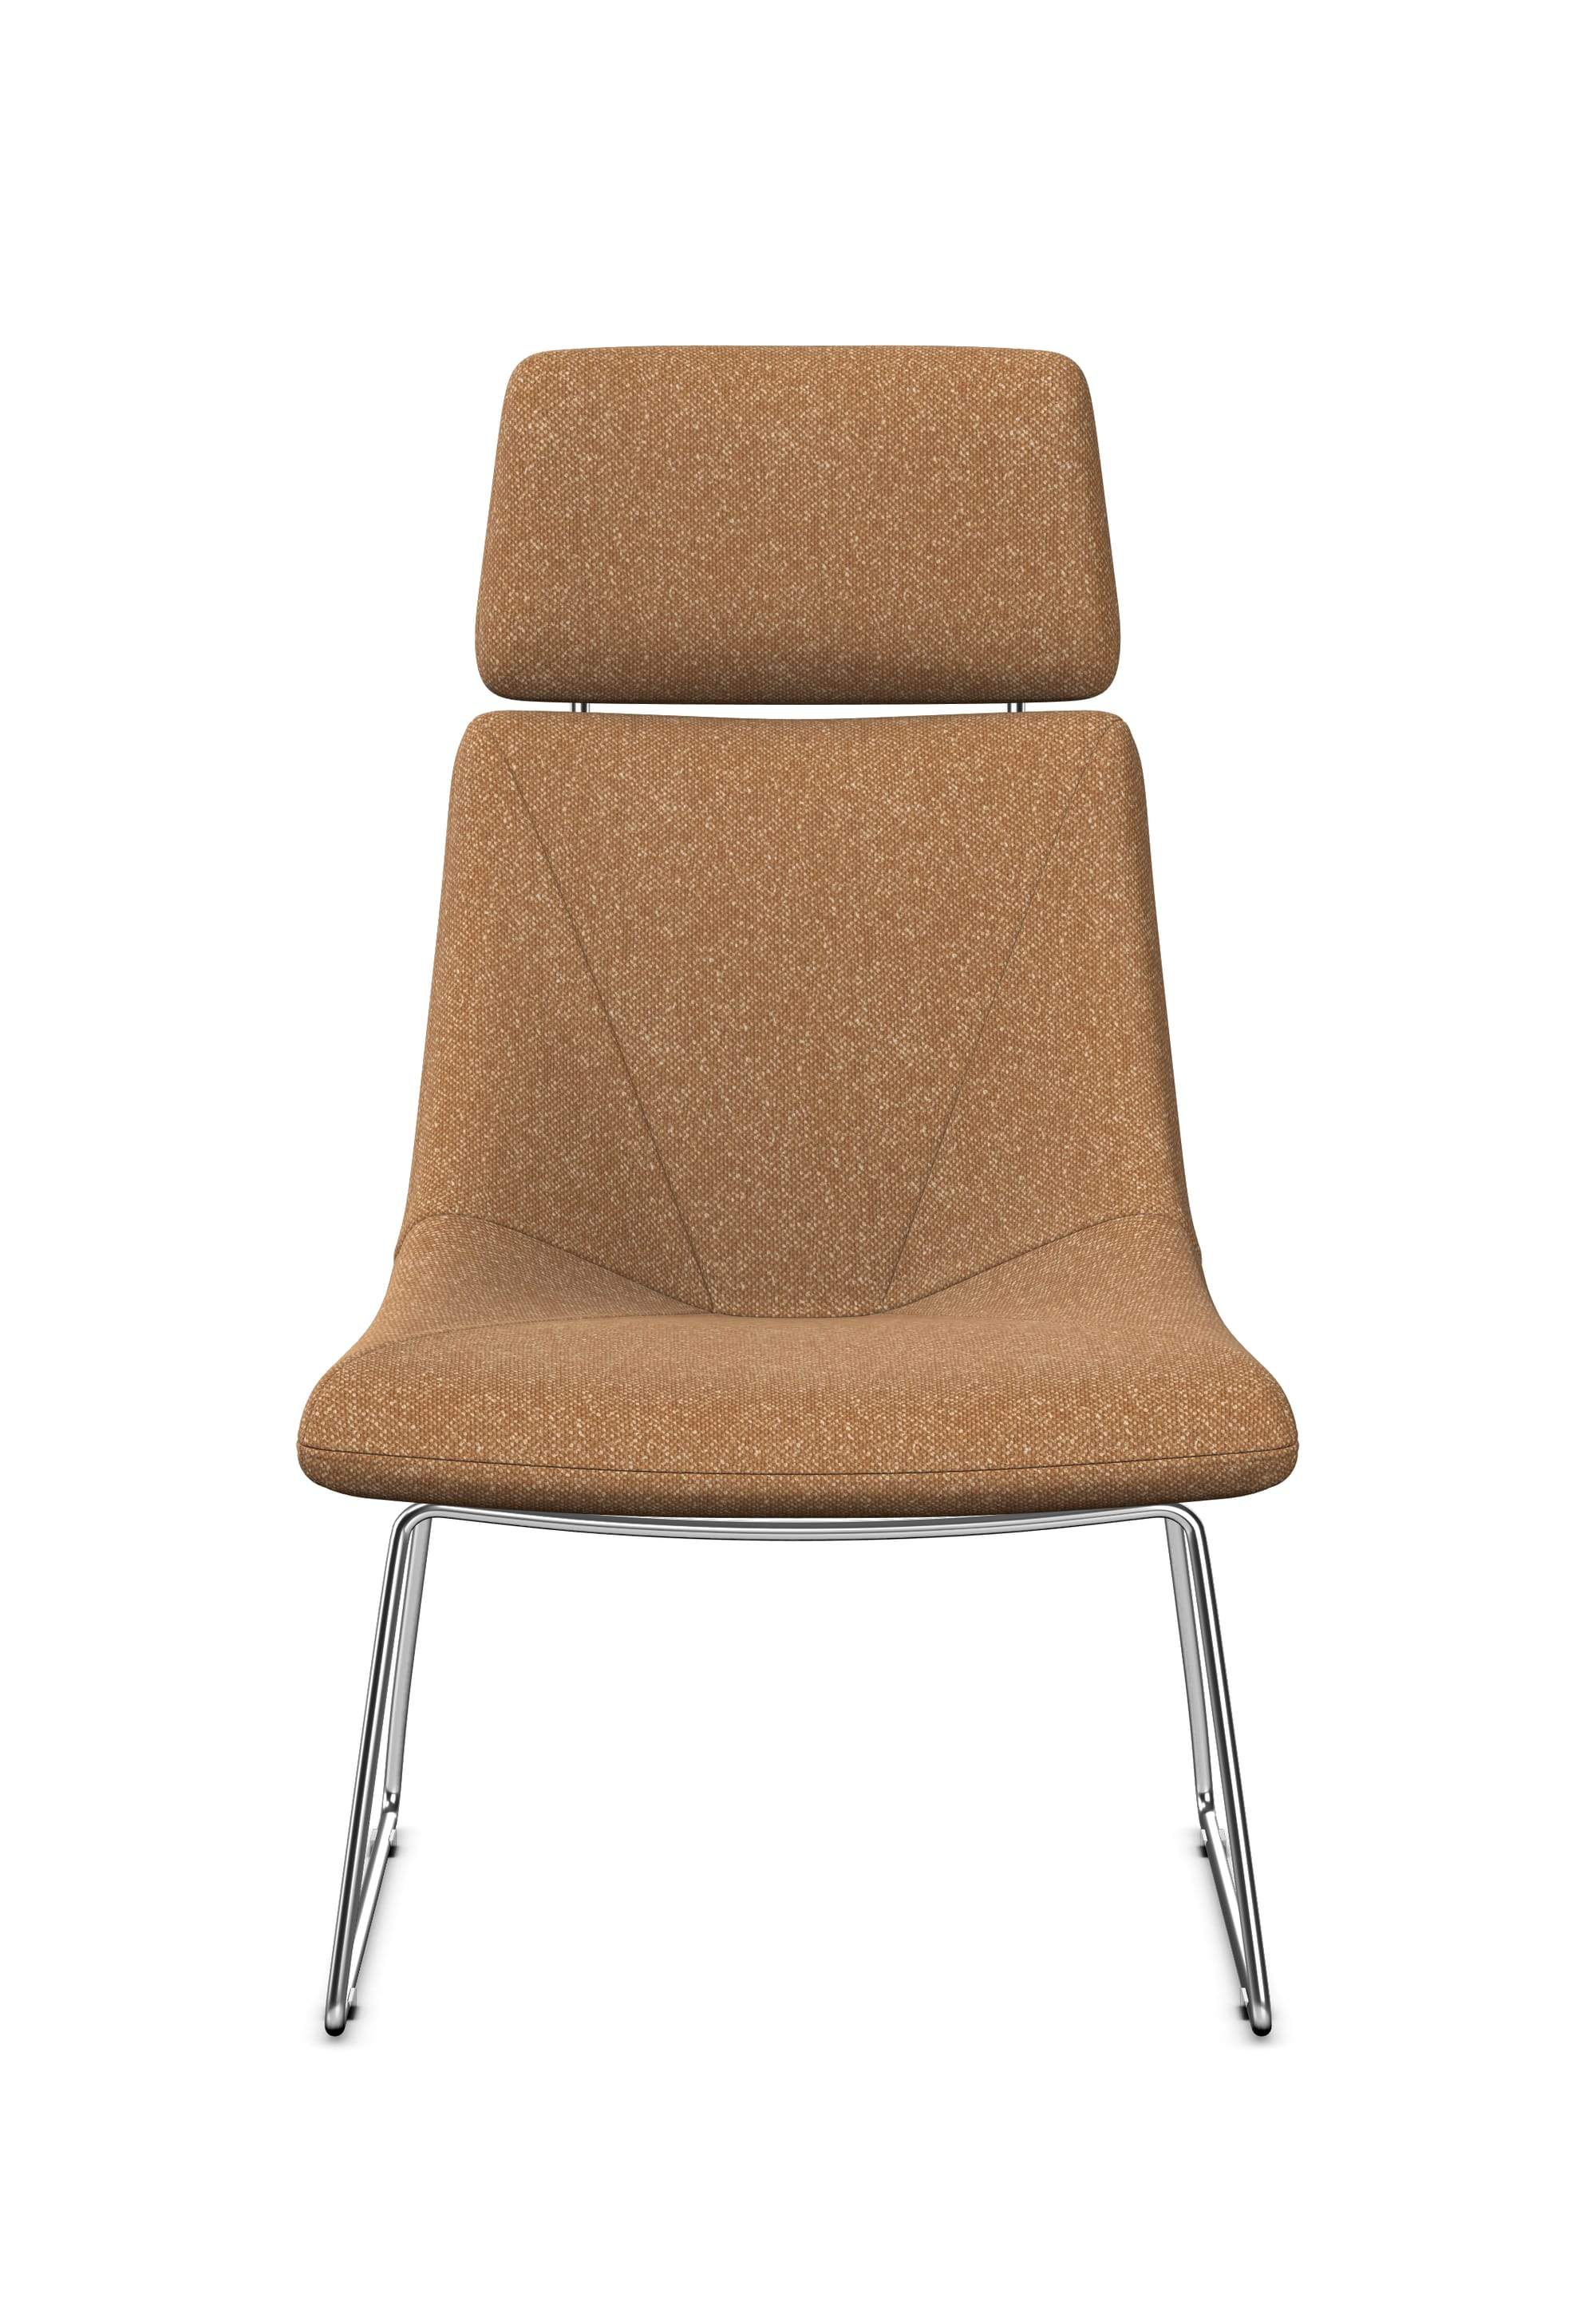 REMI - Large Chair with Headrest, Skid Metal Base